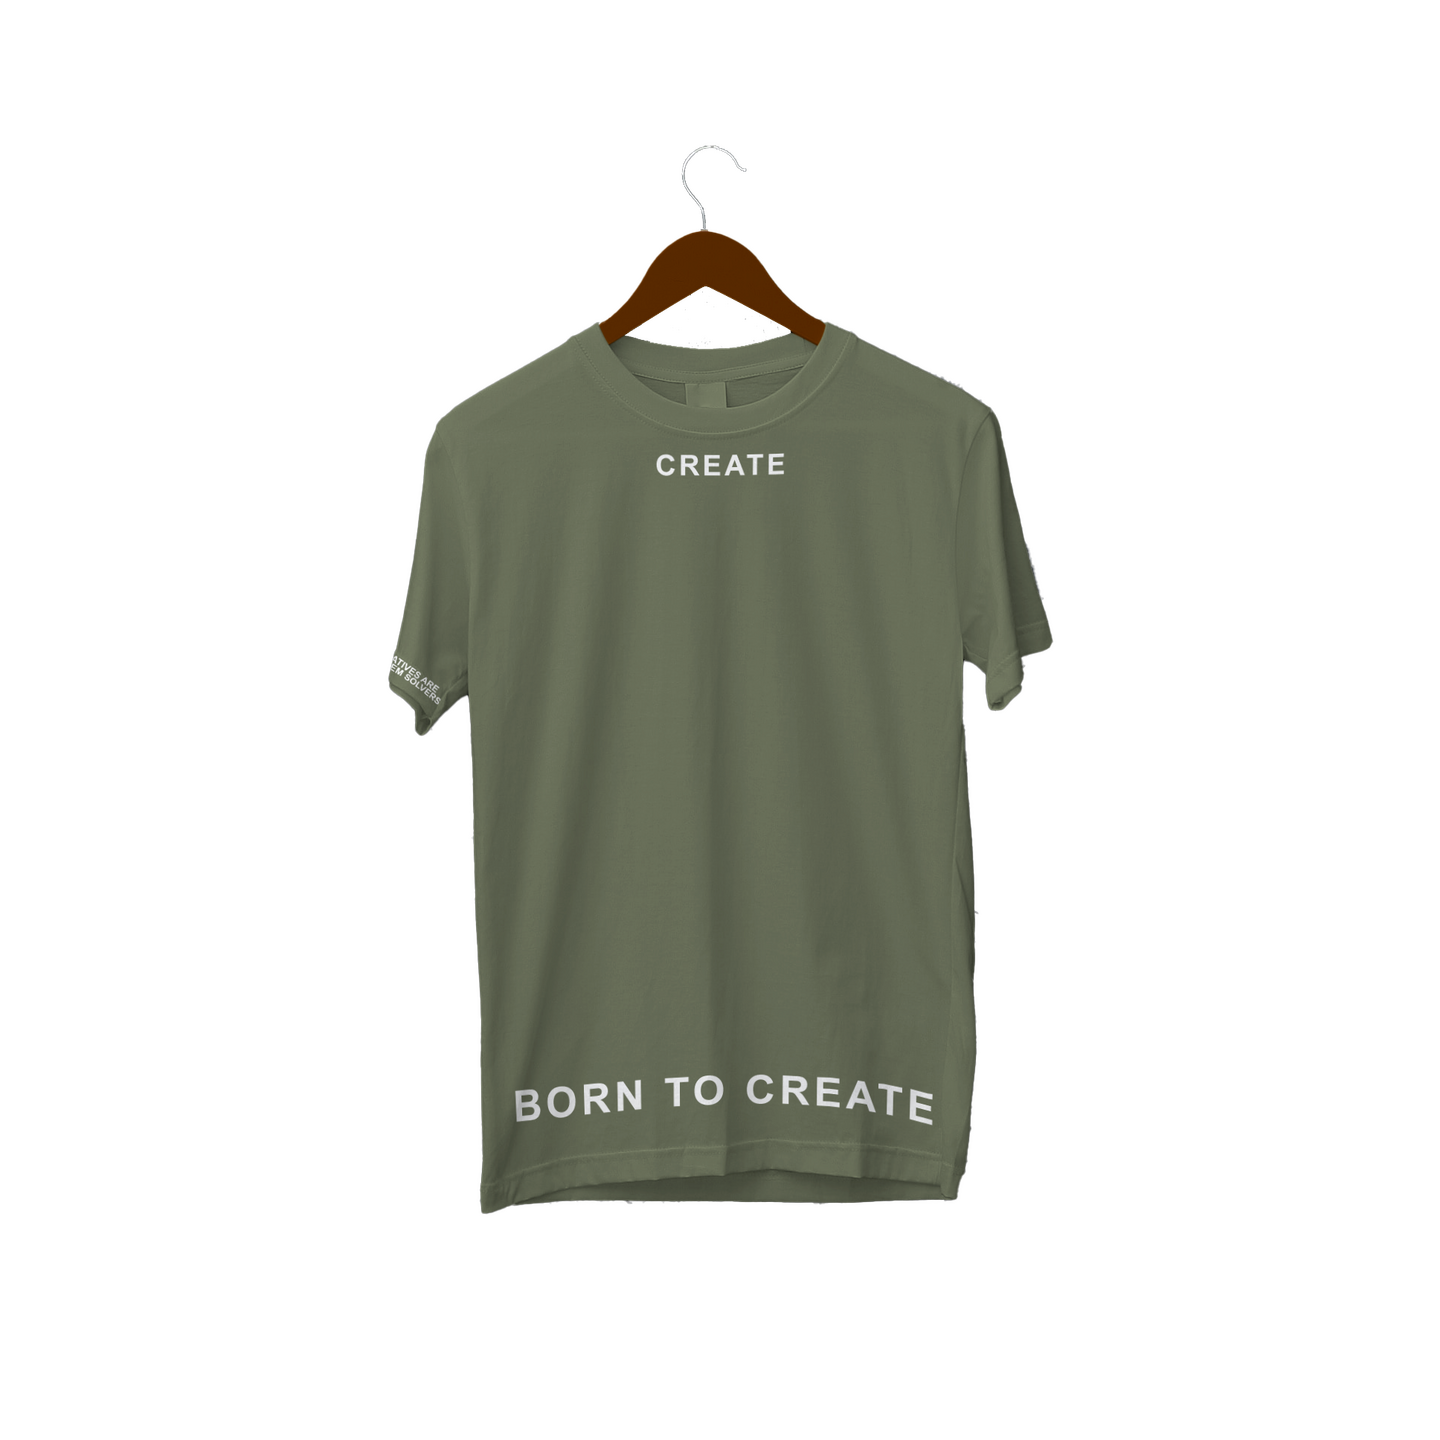 A Born to Create Shirt we have for sale